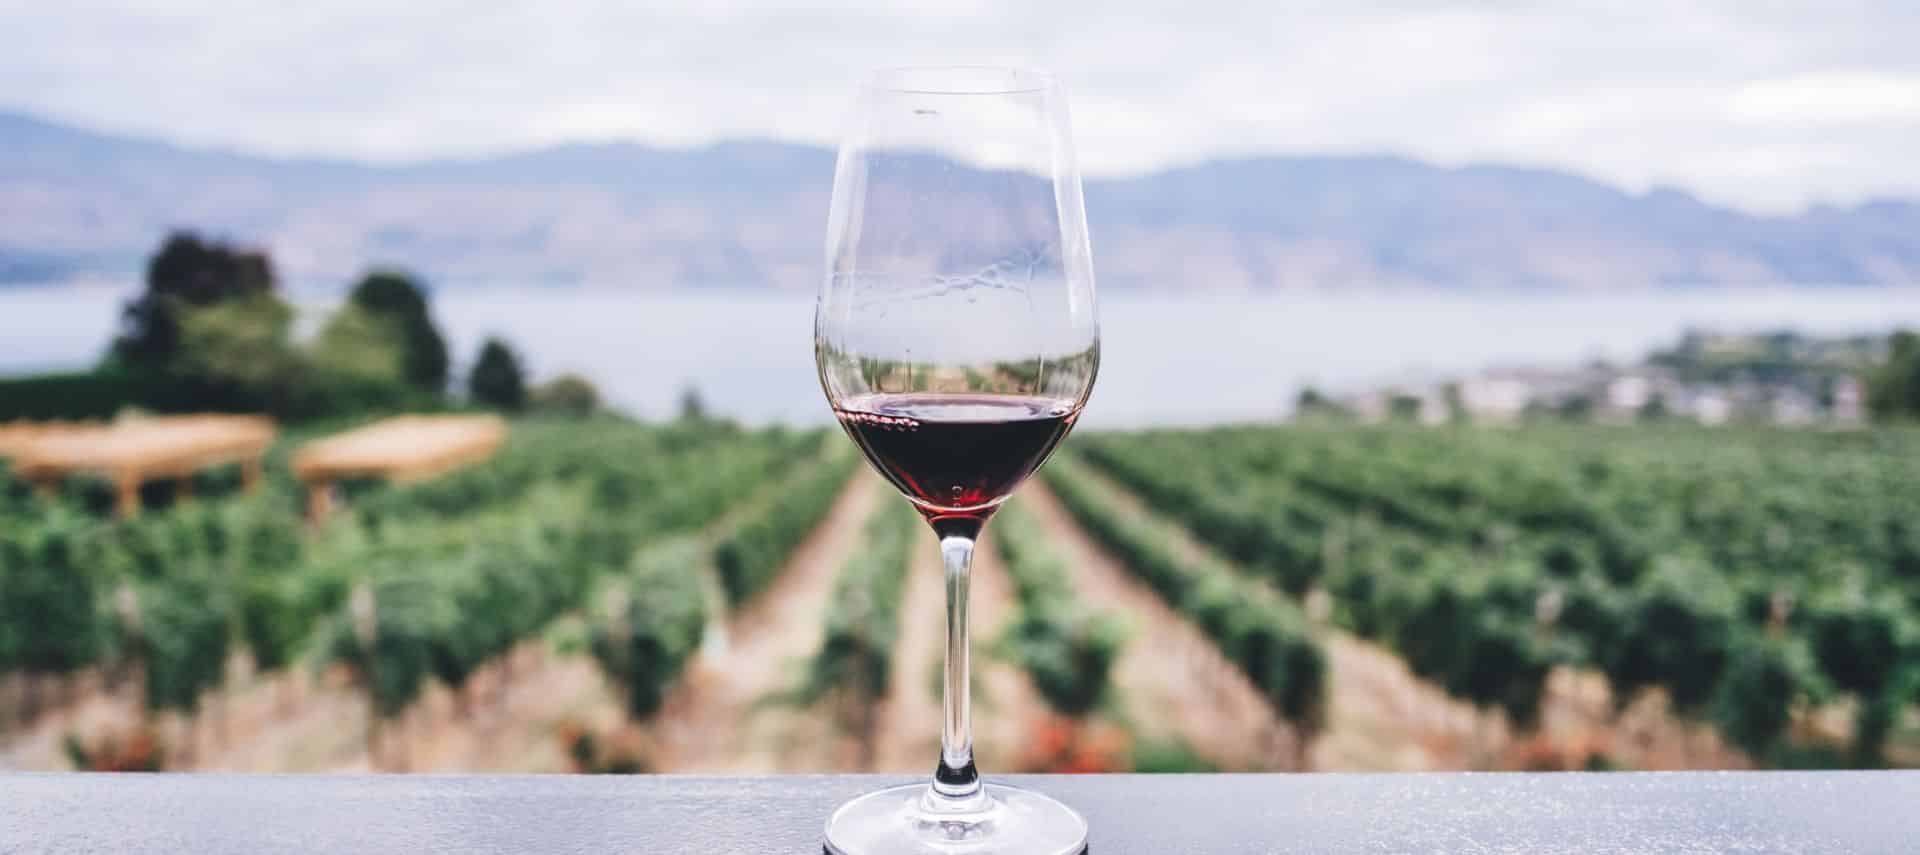 A glass of red wine sits on a ledge with a vineyard and ocean and hills in the background